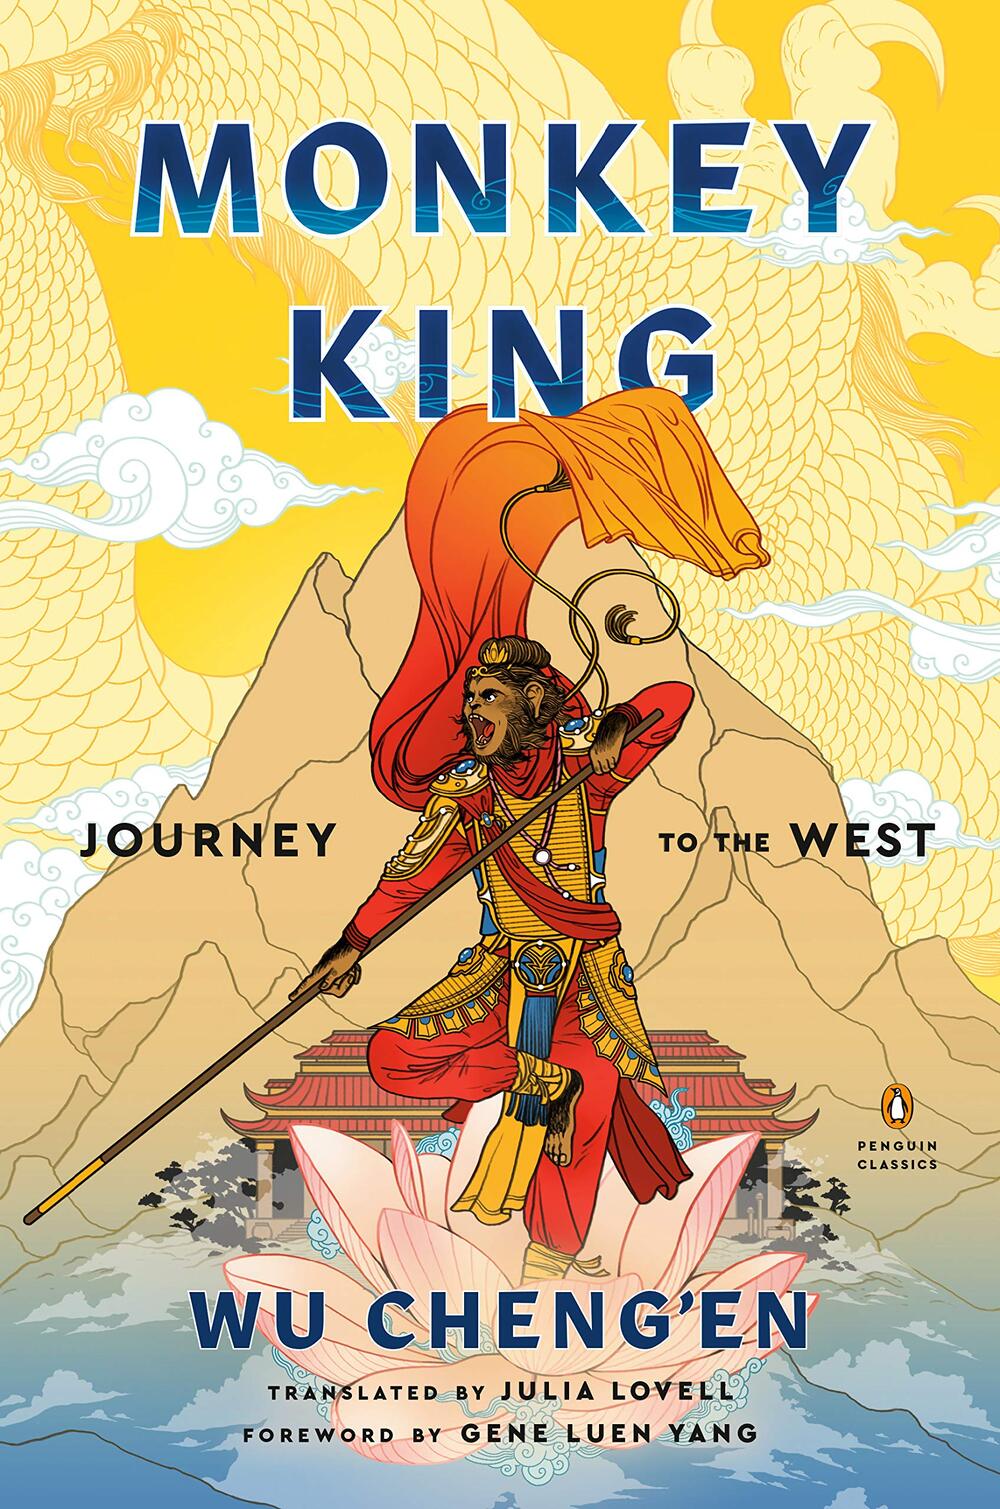 Cover of Monkey King: Journey to the West featuring an illustration of a monkey in king-like clothing riding on a lotus brandishing a staff. In the background is a temple, a mountain, and a textured yellow background of a dragon.